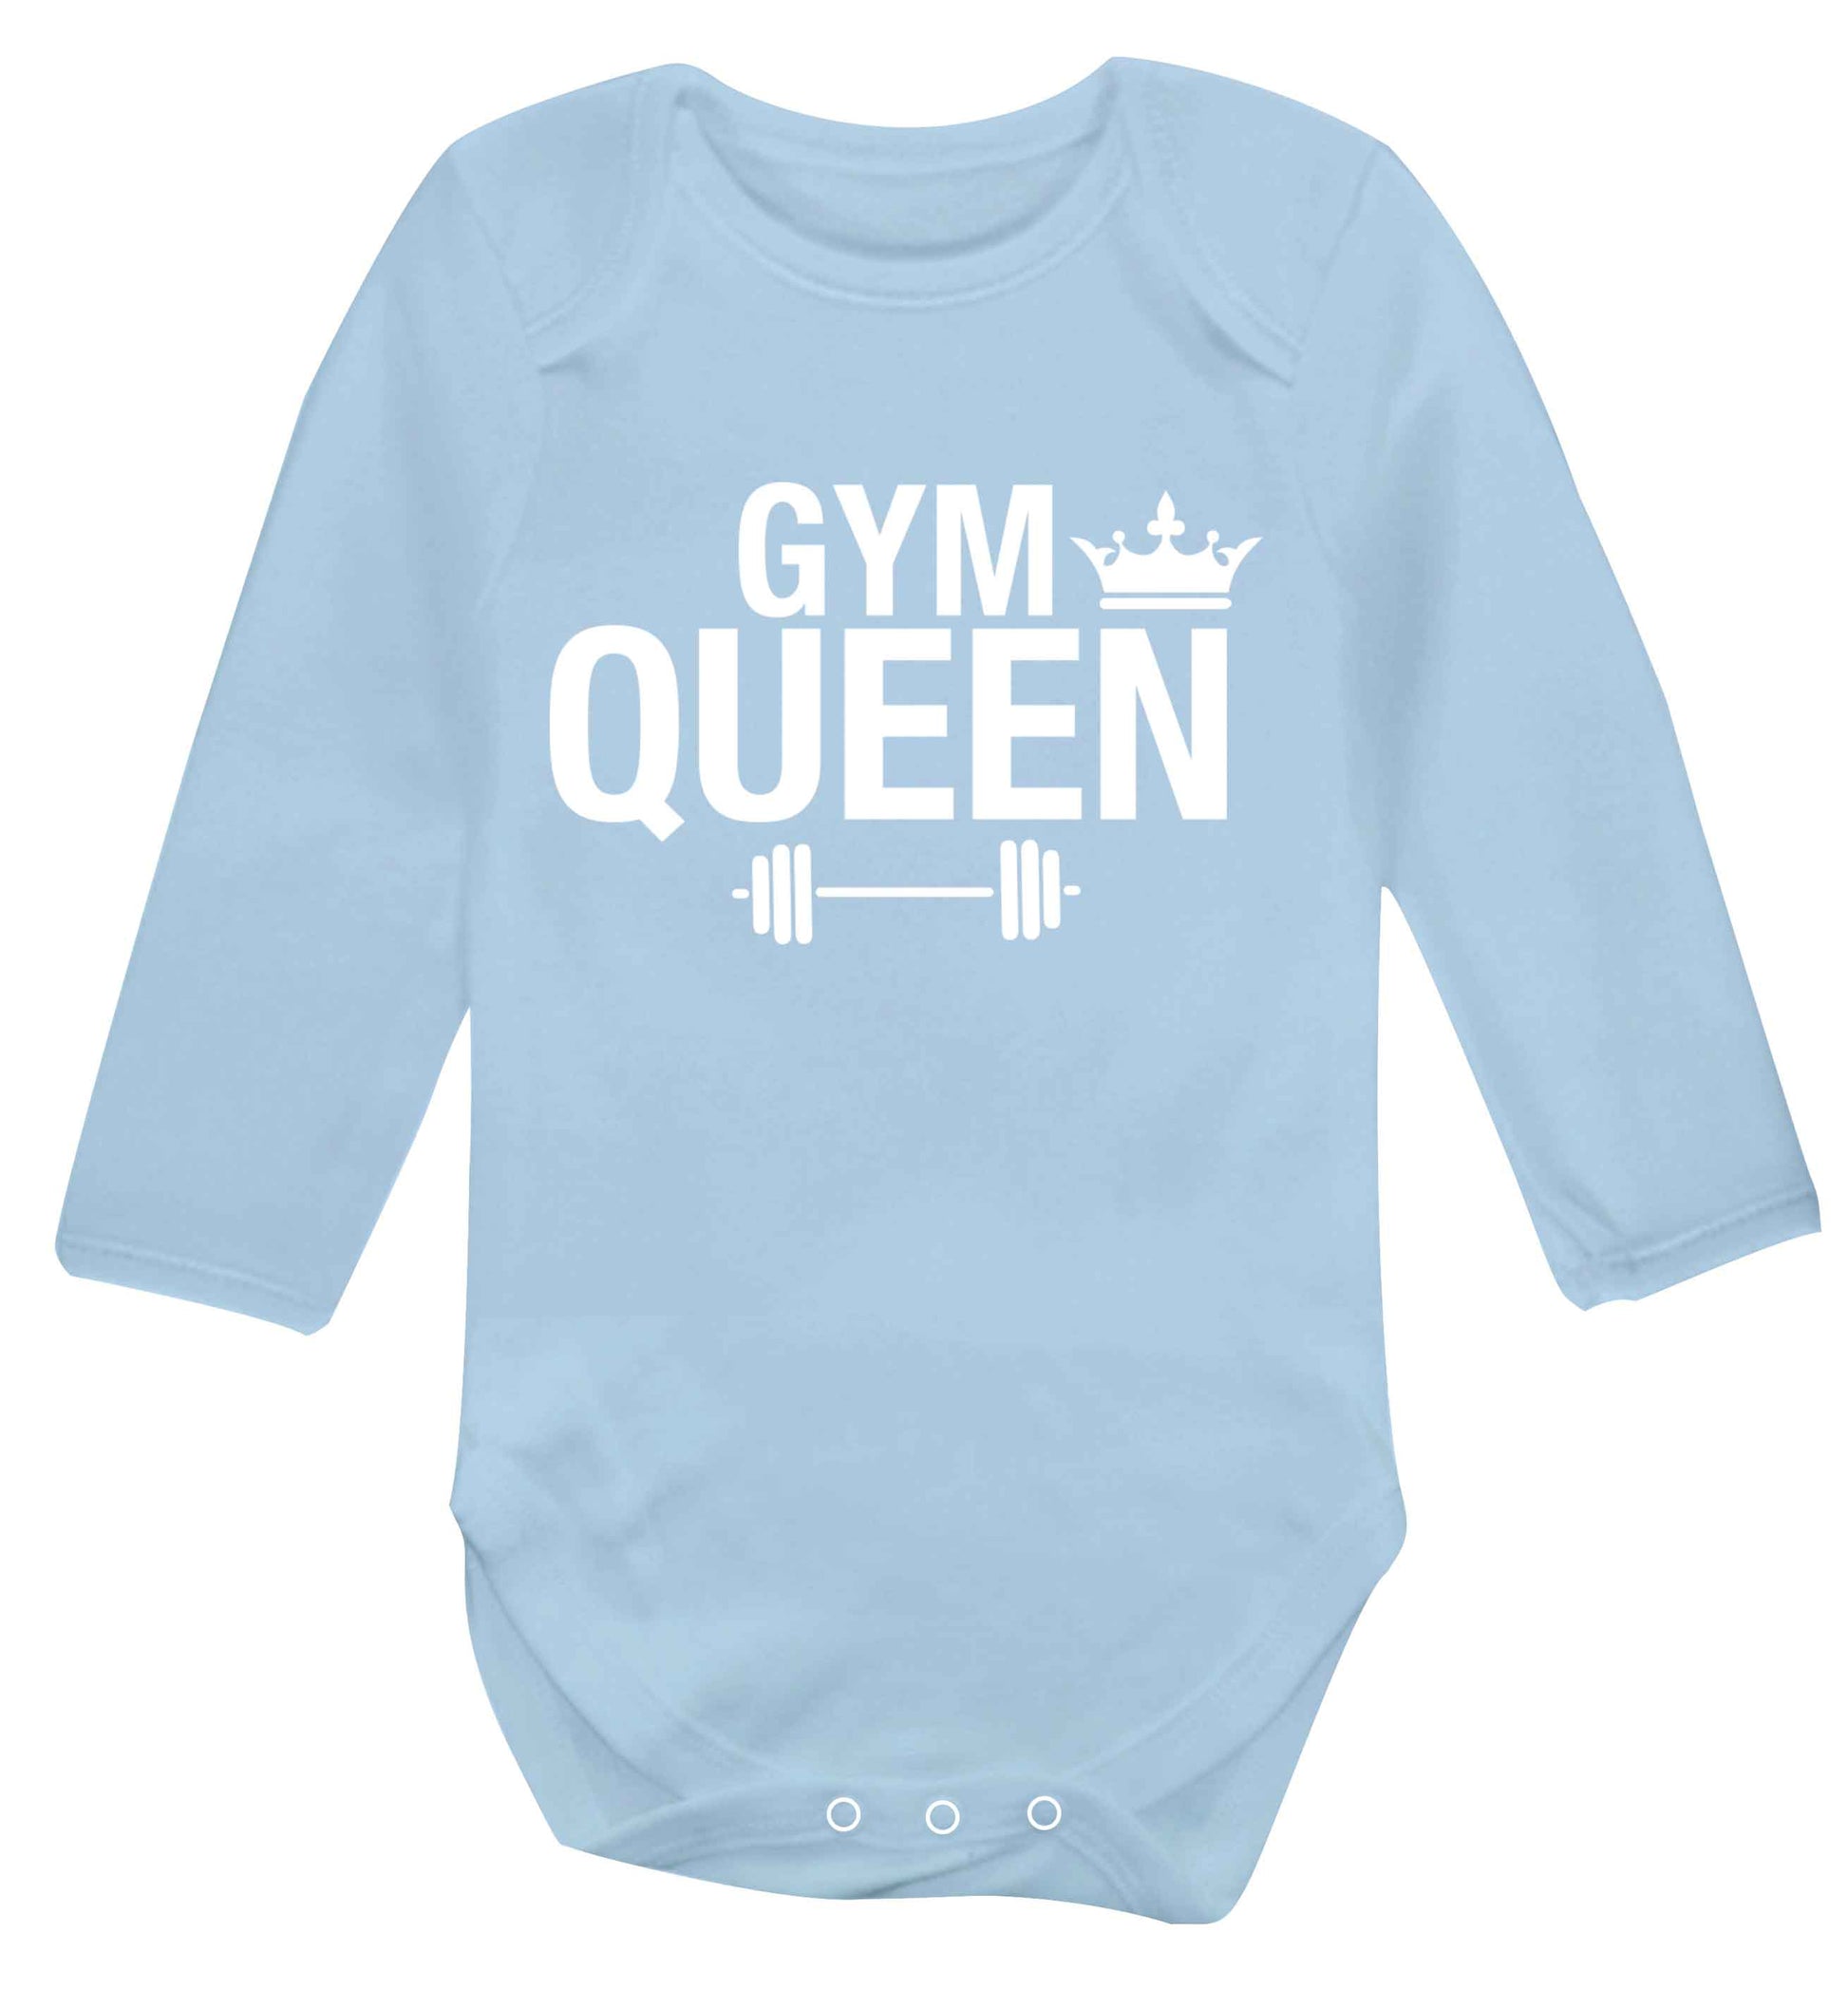 Gym queen Baby Vest long sleeved pale blue 6-12 months